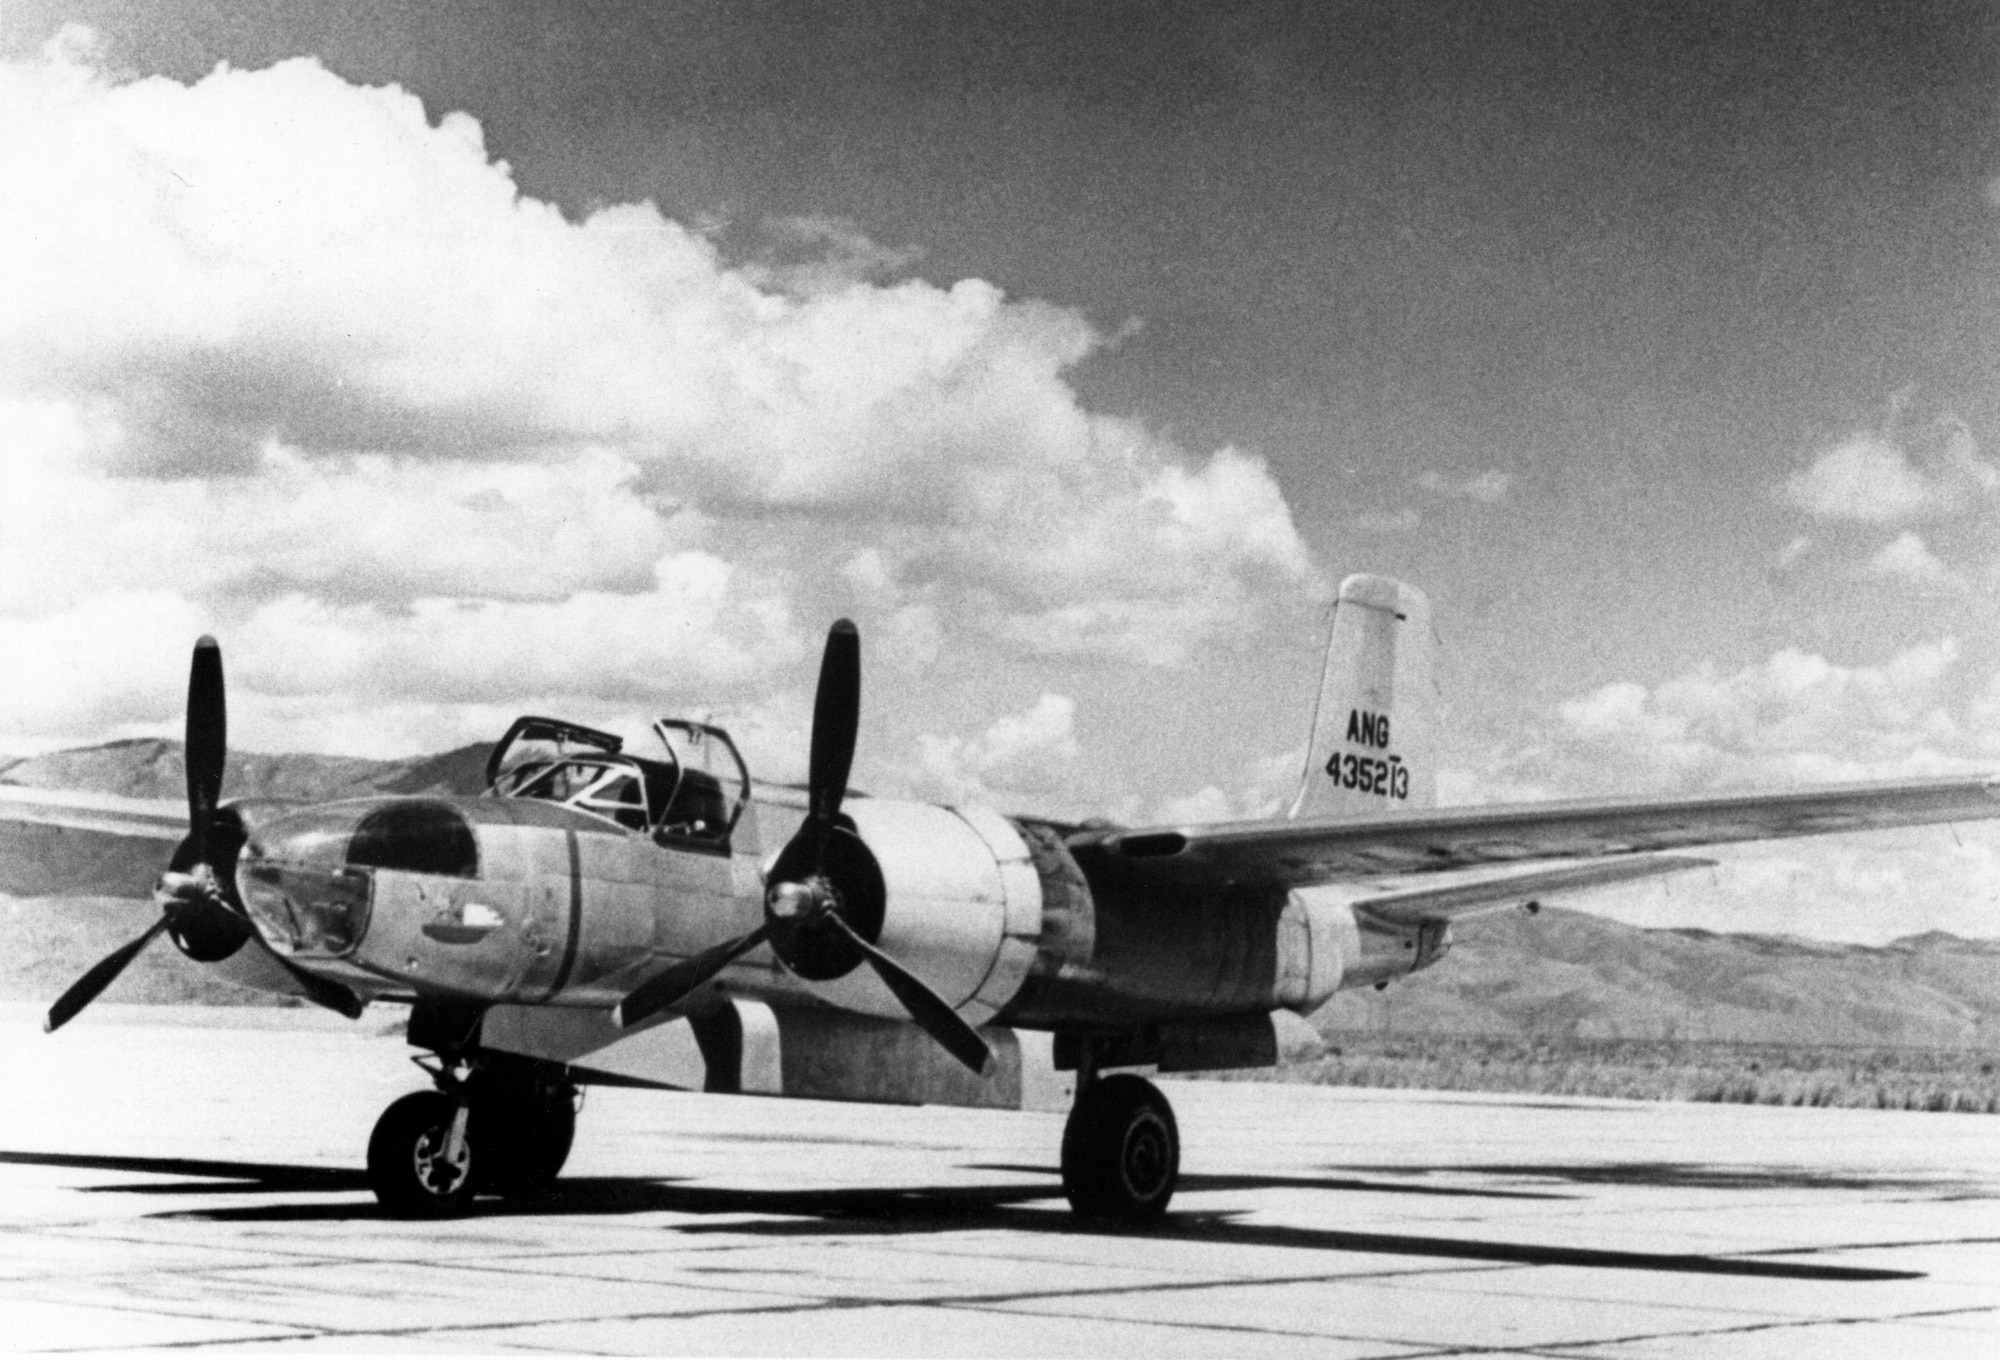 This Douglas A-26C-30-DT Invader, serial number 44-35213, was one of several examples of the type assigned to the Oregon Air National Guard (OreANG) in the late 1940's.  It was similar to the OreANG A-26B-40-DL, serial number 41-39526, lost on April 9, 1948.  The A-26 bombers (designated B-26 in June, 1948) were used by the OreANG in a utility role.  For example, this A-26C, possibly pictured at Gowen Field, Idaho during OreANG summer training in 1950, towed aerial targets for the 142d Fighter Group’s P-51D Mustang fighter pilots to practice their aerial gunnery skills on.  (Image from the 142nd Fighter Wing History Archives)